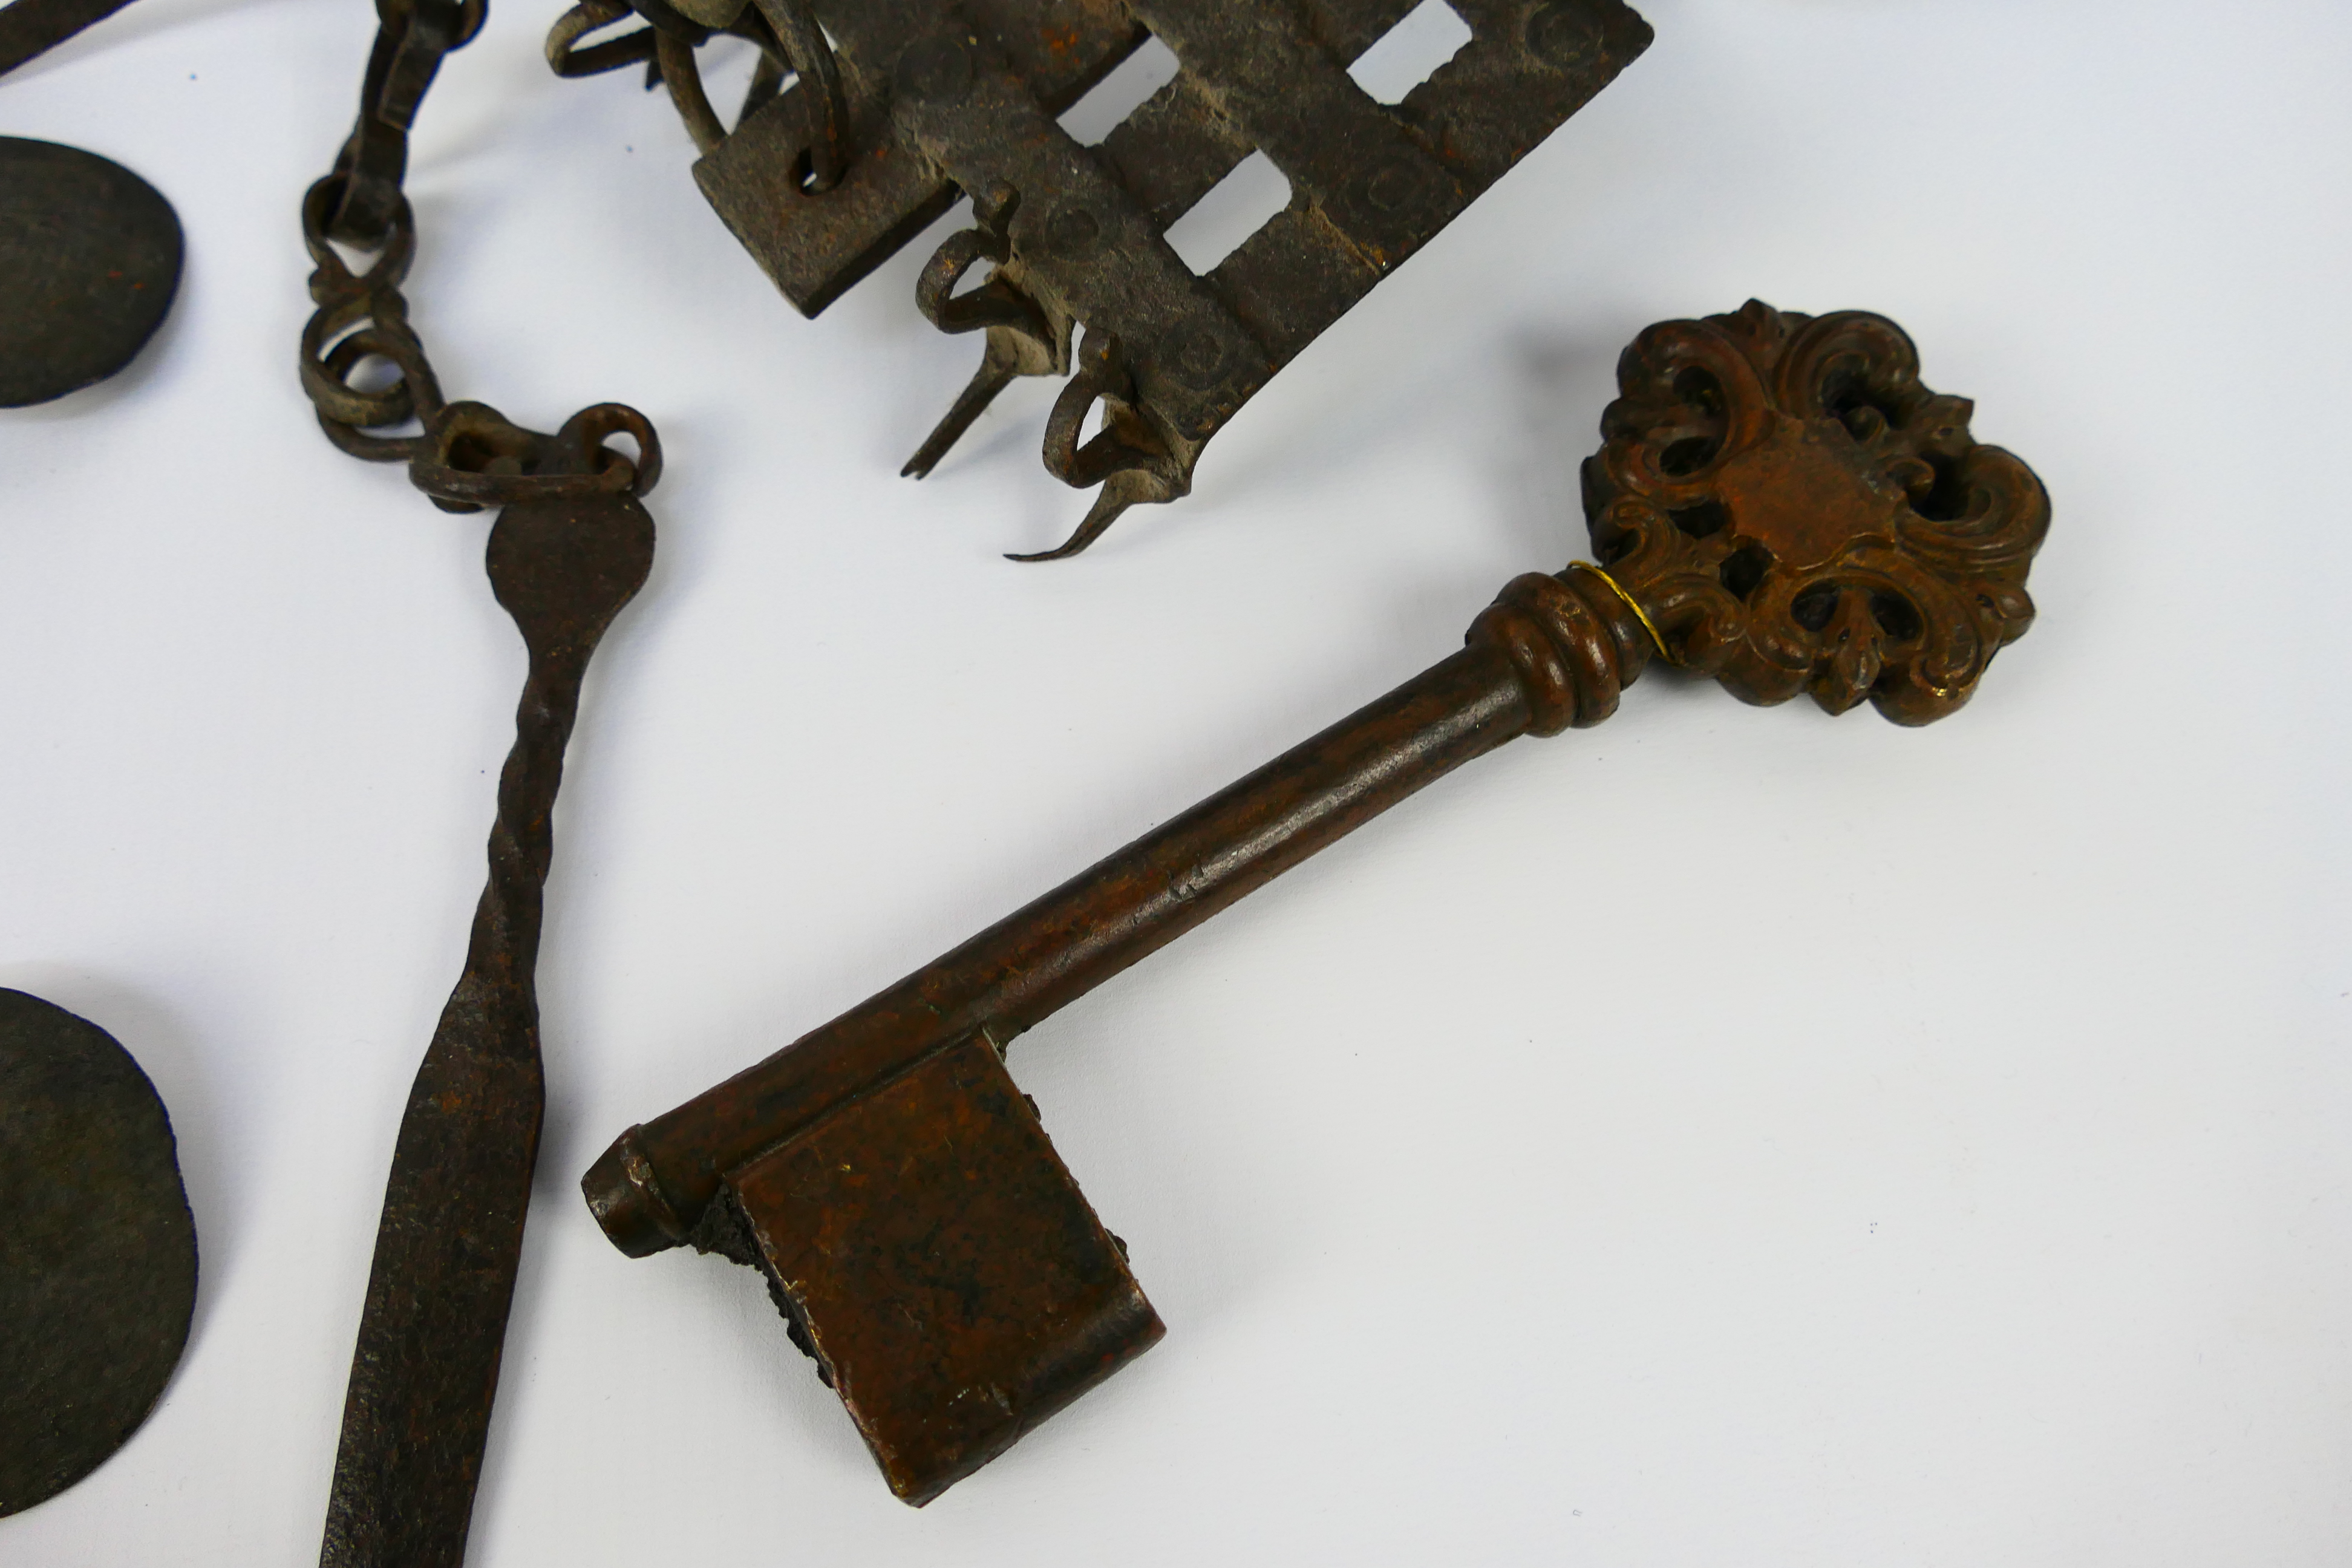 An 18th or 19th century iron oil burner, large bronze key and antique cast iron snaffle bit. - Image 4 of 4